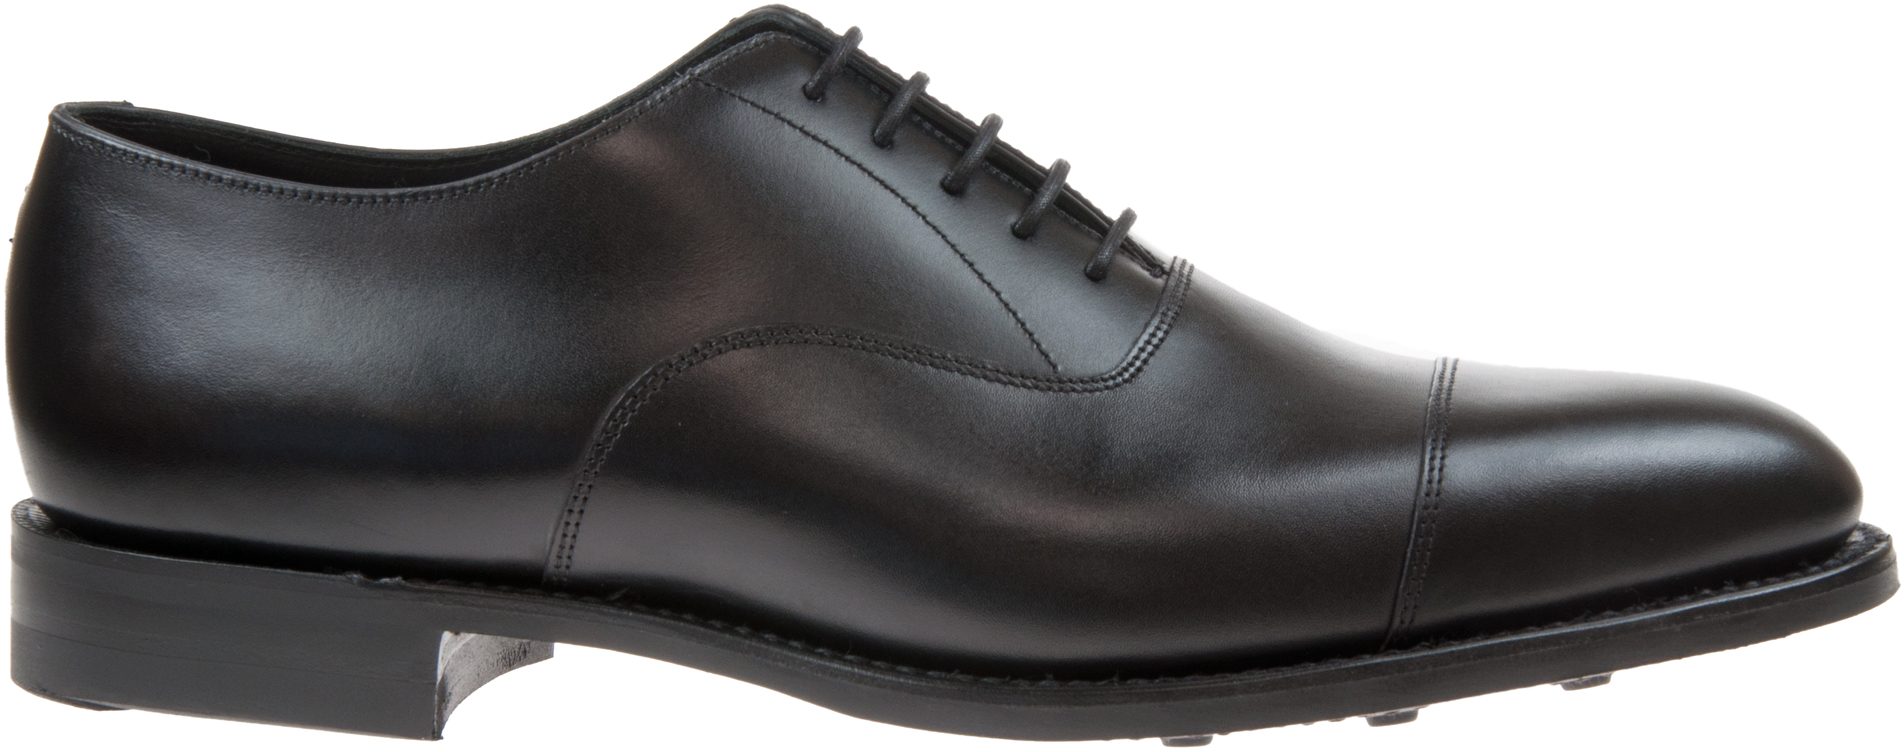 Loake Aldwych Black Danite - Formal Shoes - Humphries Shoes